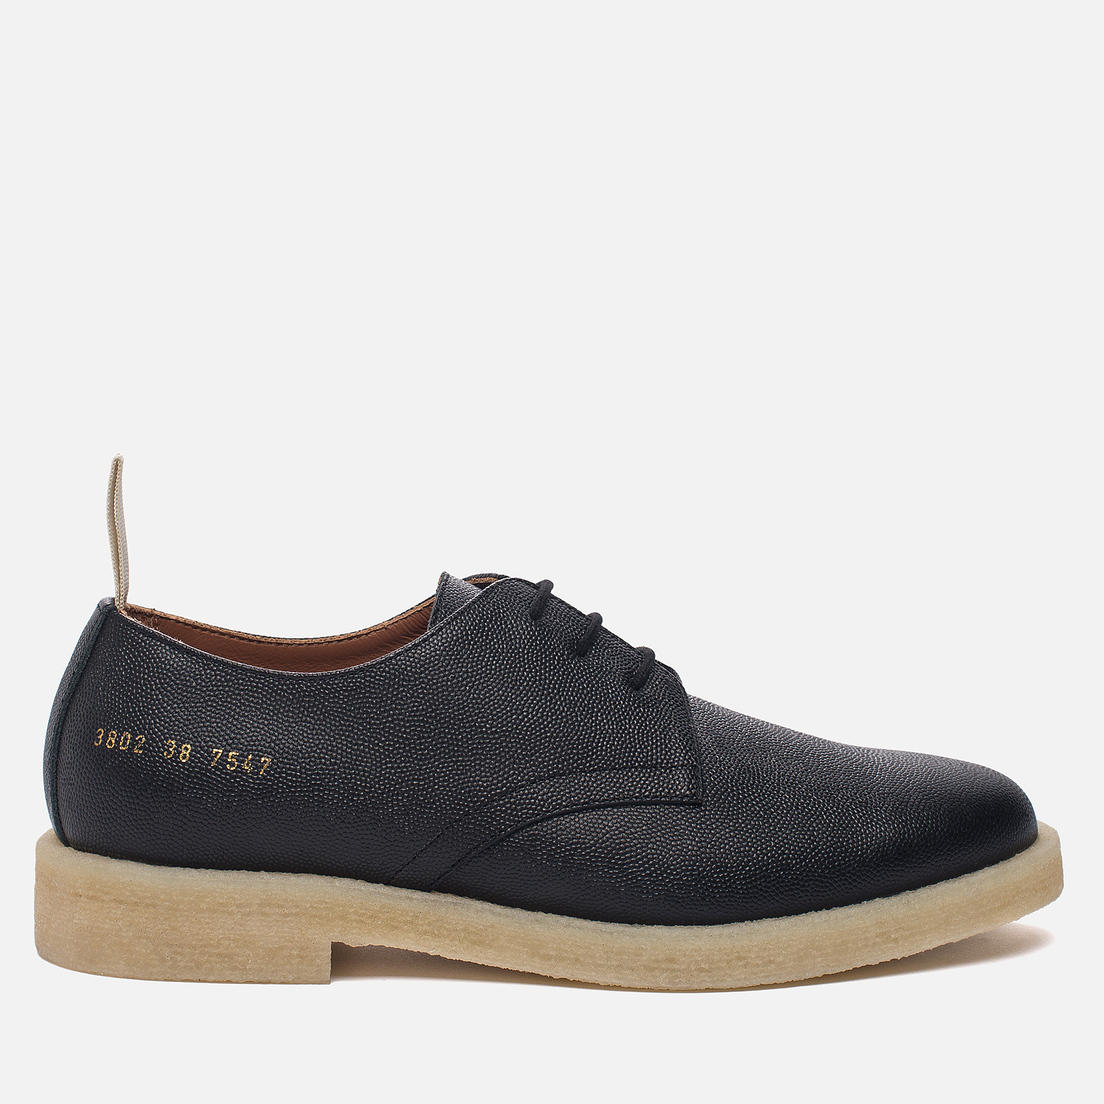 Common Projects Женские ботинки Cadet Derby 3802